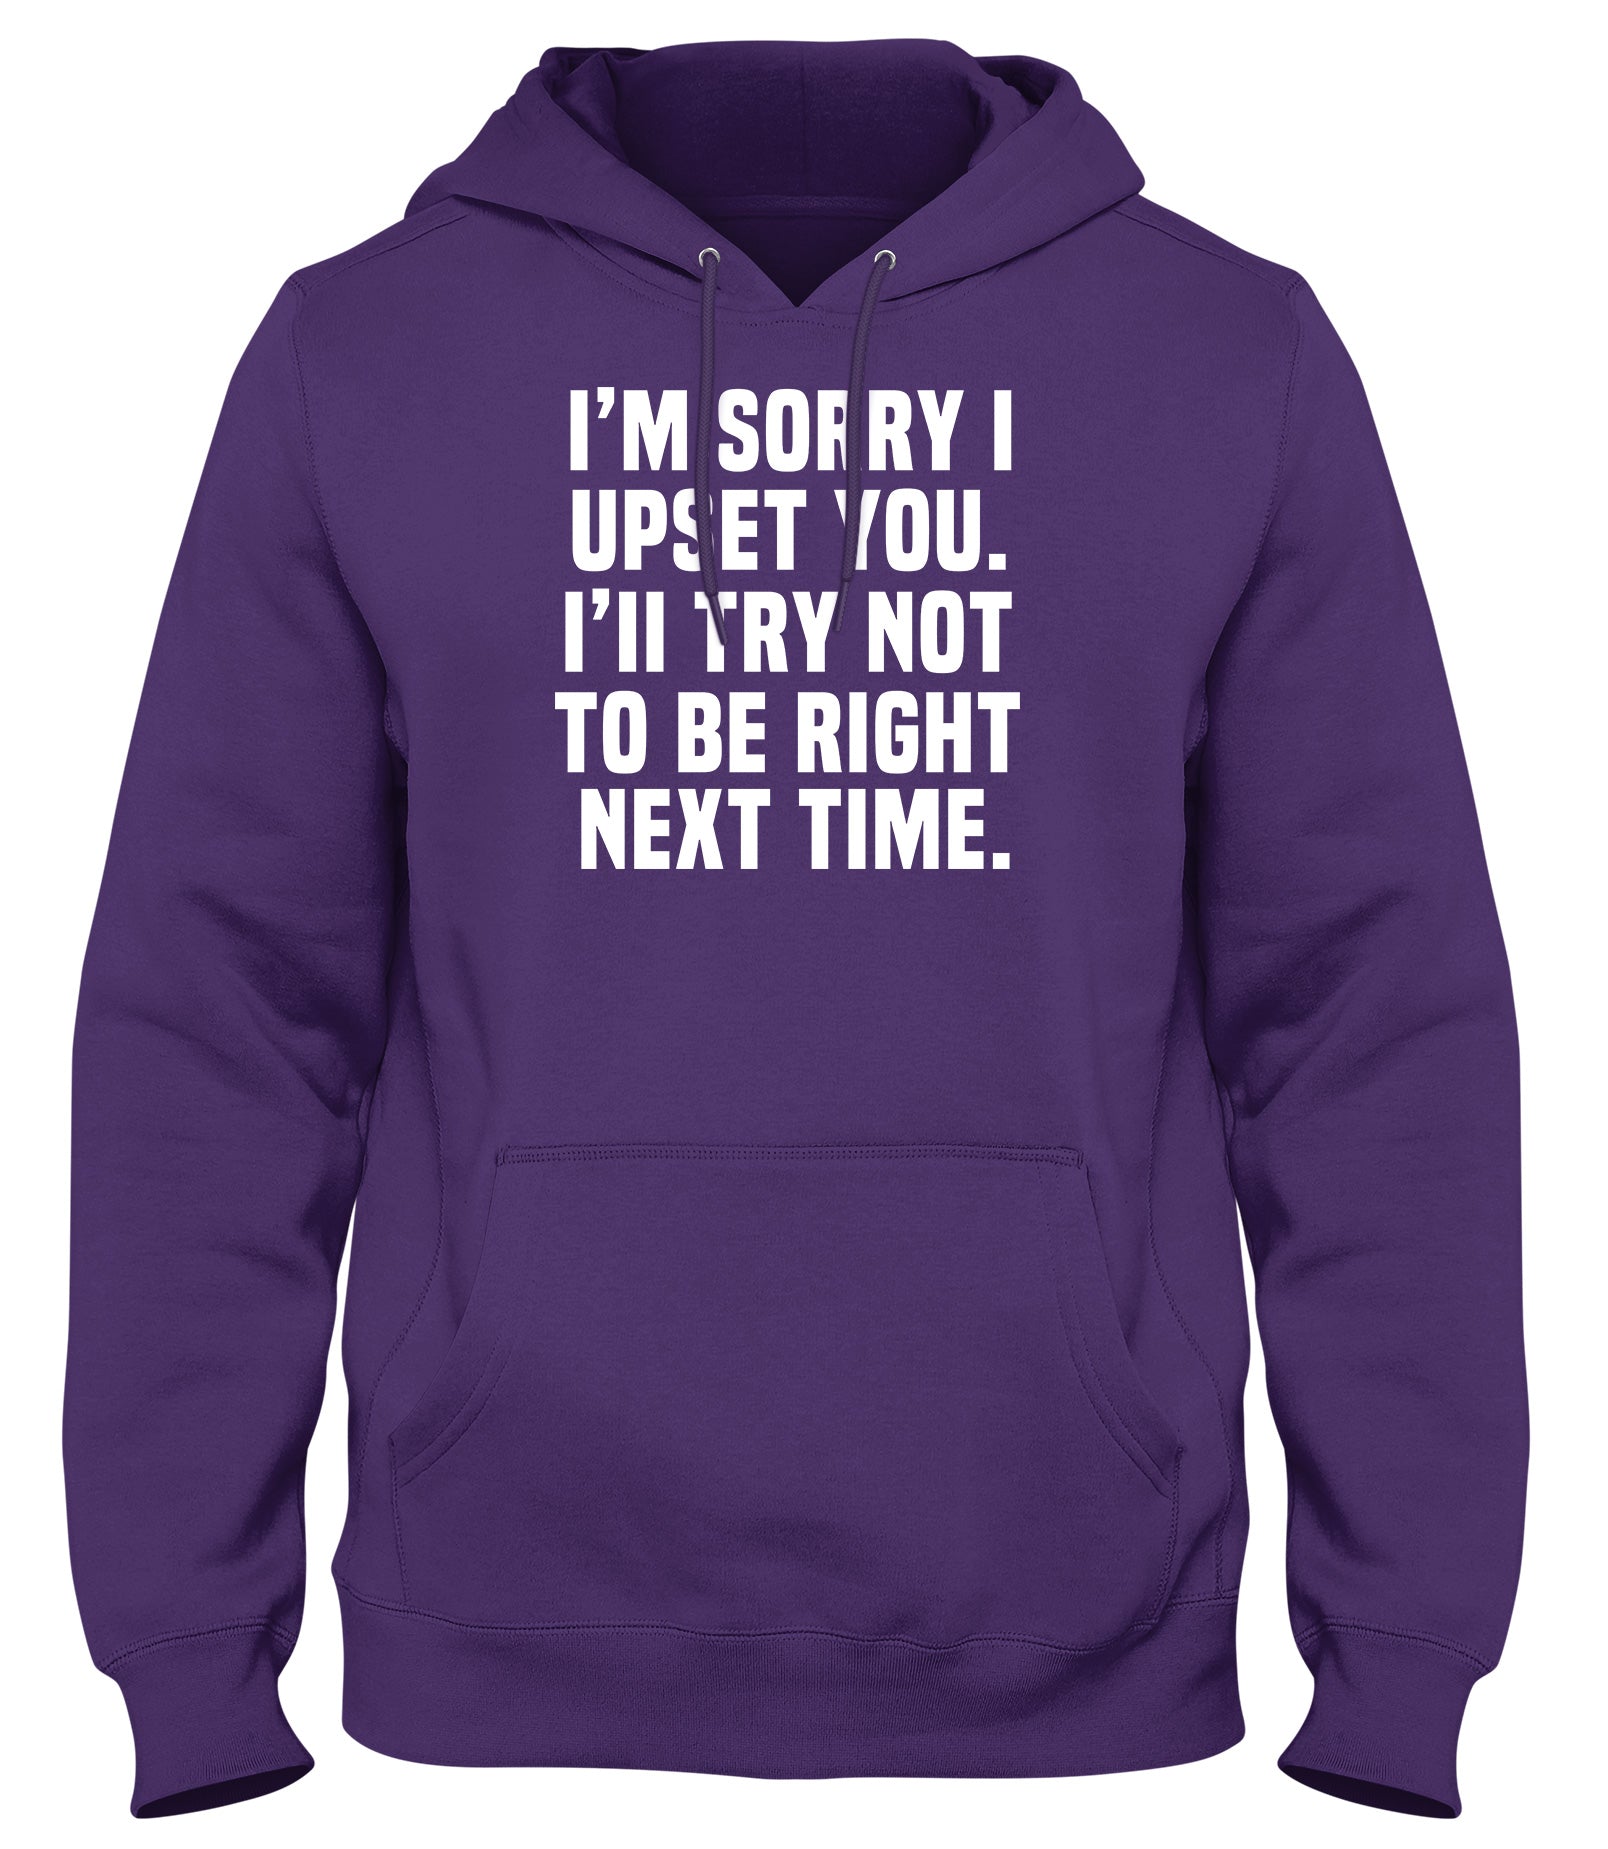 I'M SORRY I UPSET YOU. I'LL TRY NOT TO BE RIGHT NEXT TIME MENS WOMENS UNISEX FUNNY HOODIE